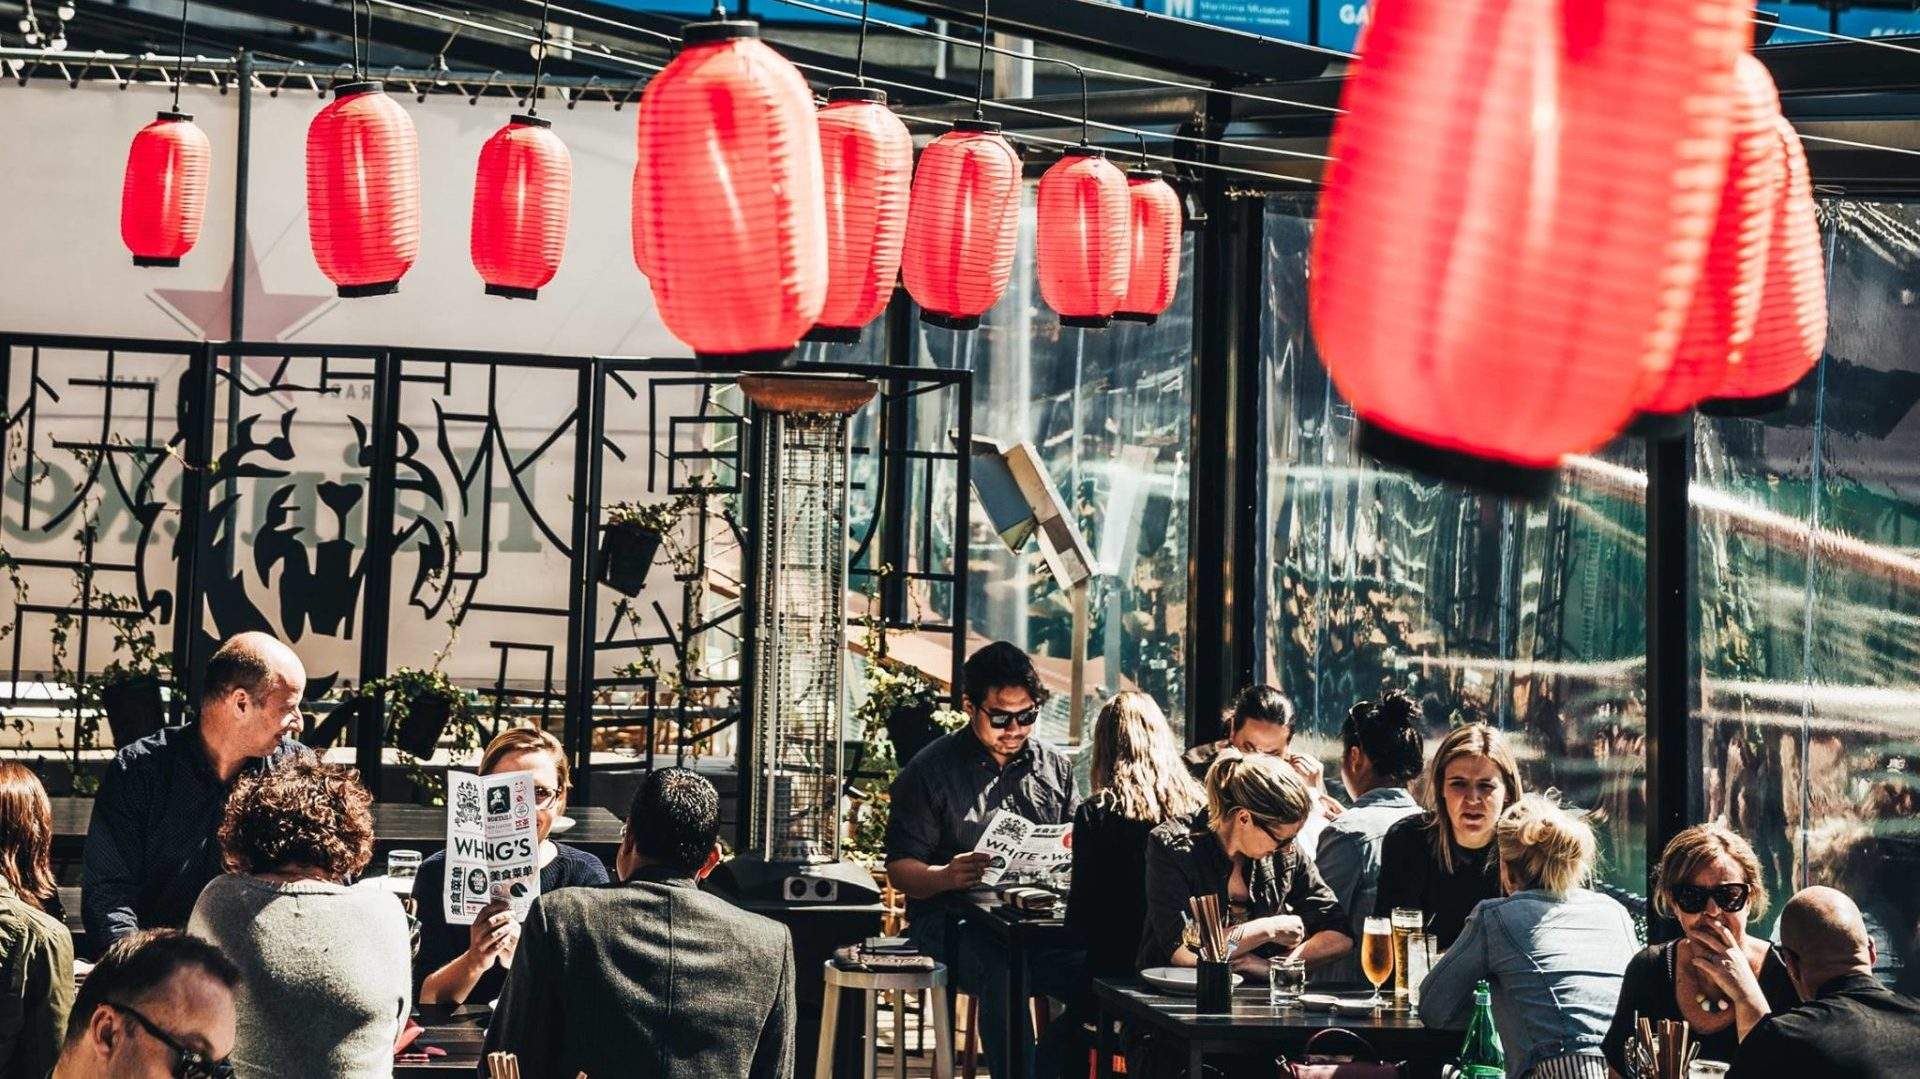 Aucklanders Can Now Enter to Win One of 100,000 Vouchers to Spend Around the City This Summer